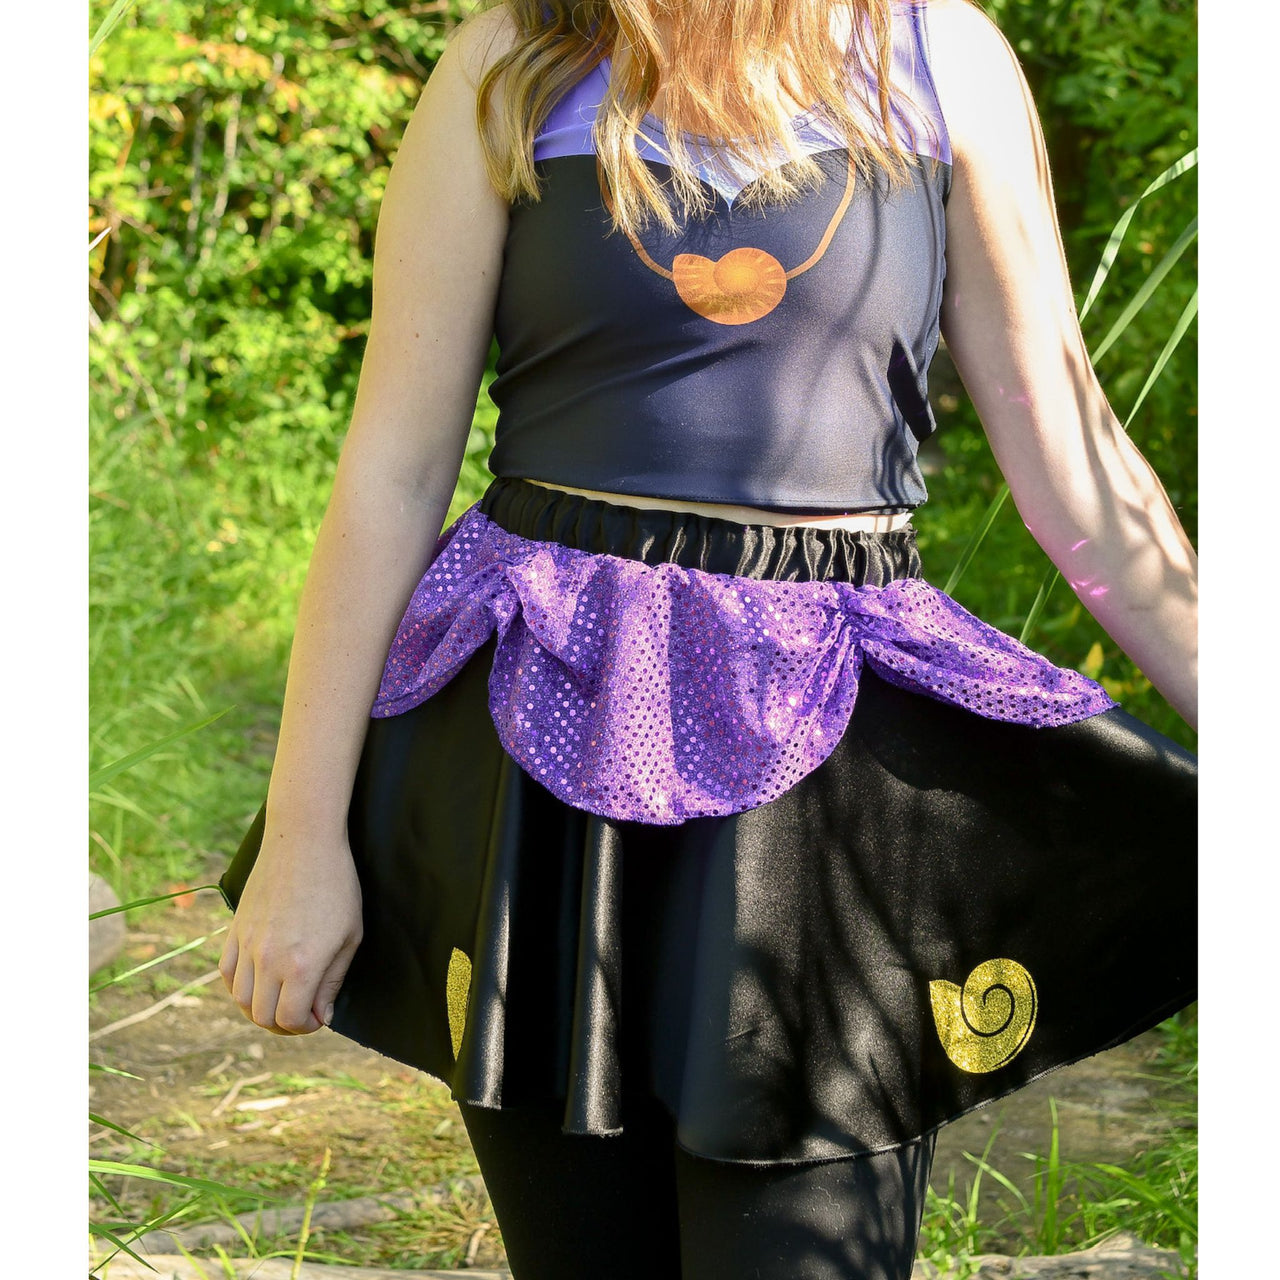 Sea Witch Royalty Skirt